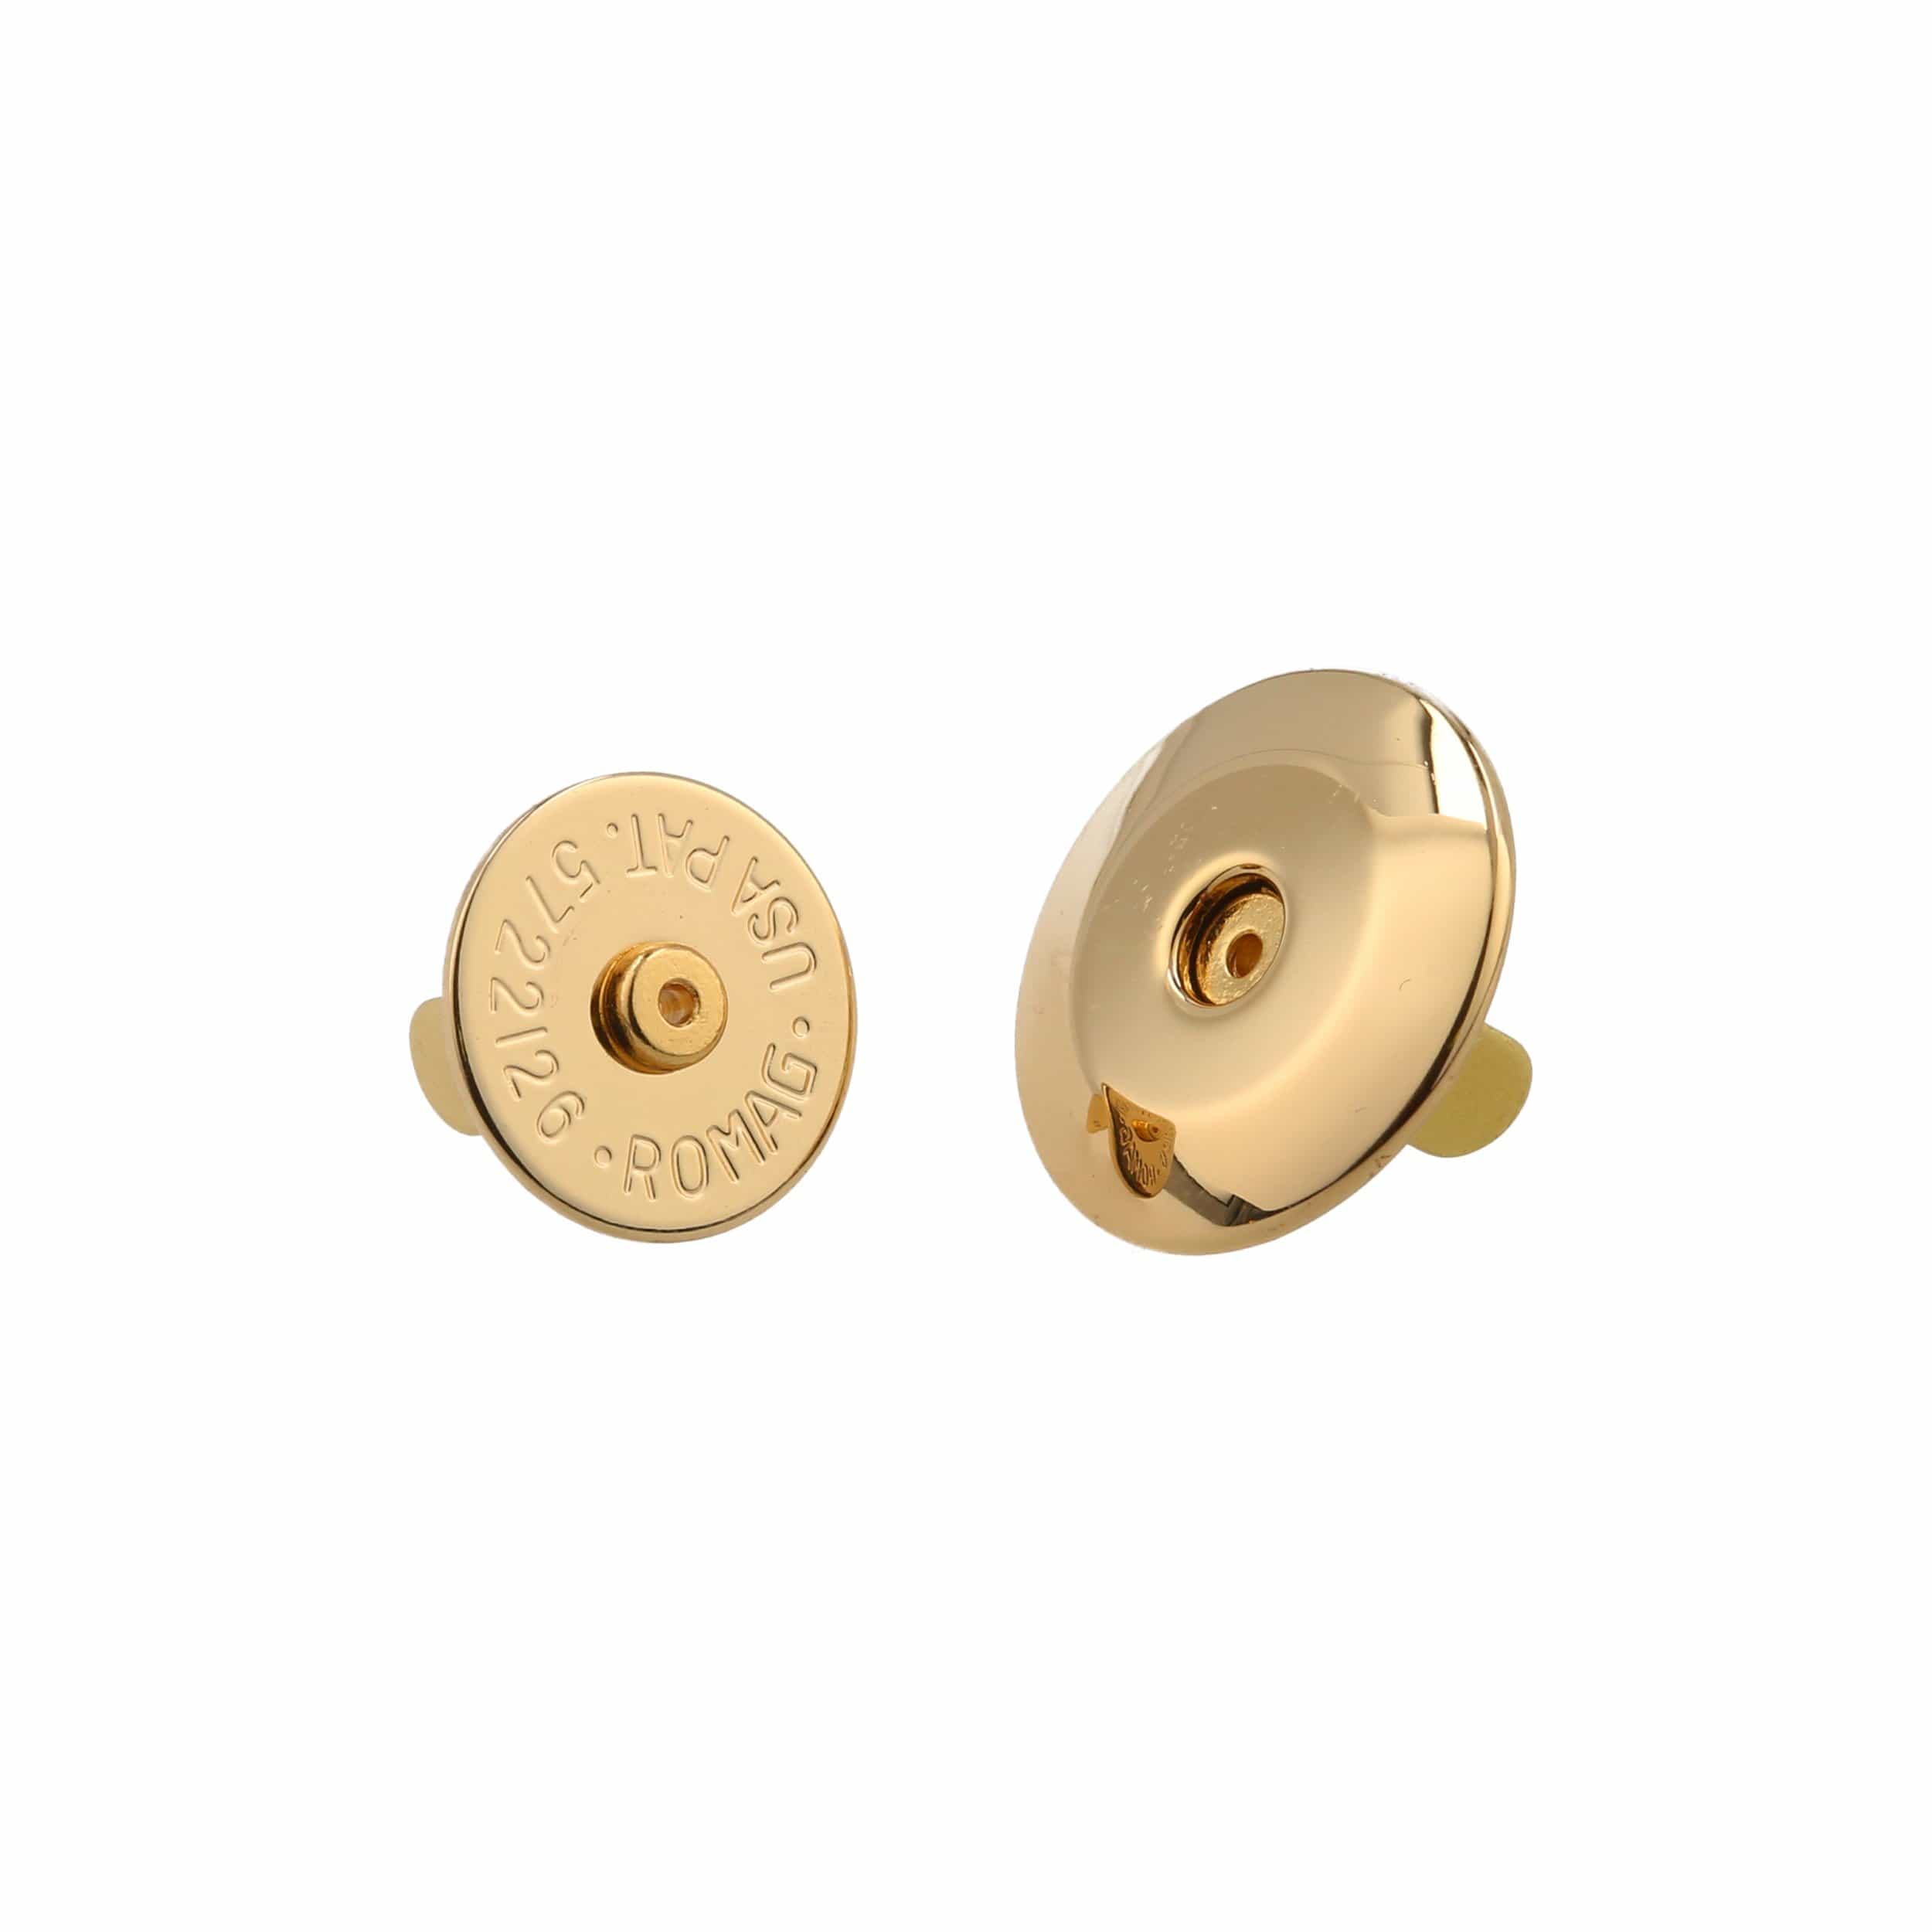 Ohio Travel Bag Fasteners 19mm Gold, Beveled Low Profile Magnetic Snap, Steel, #P-2407-GOLD P-2407-GOLD